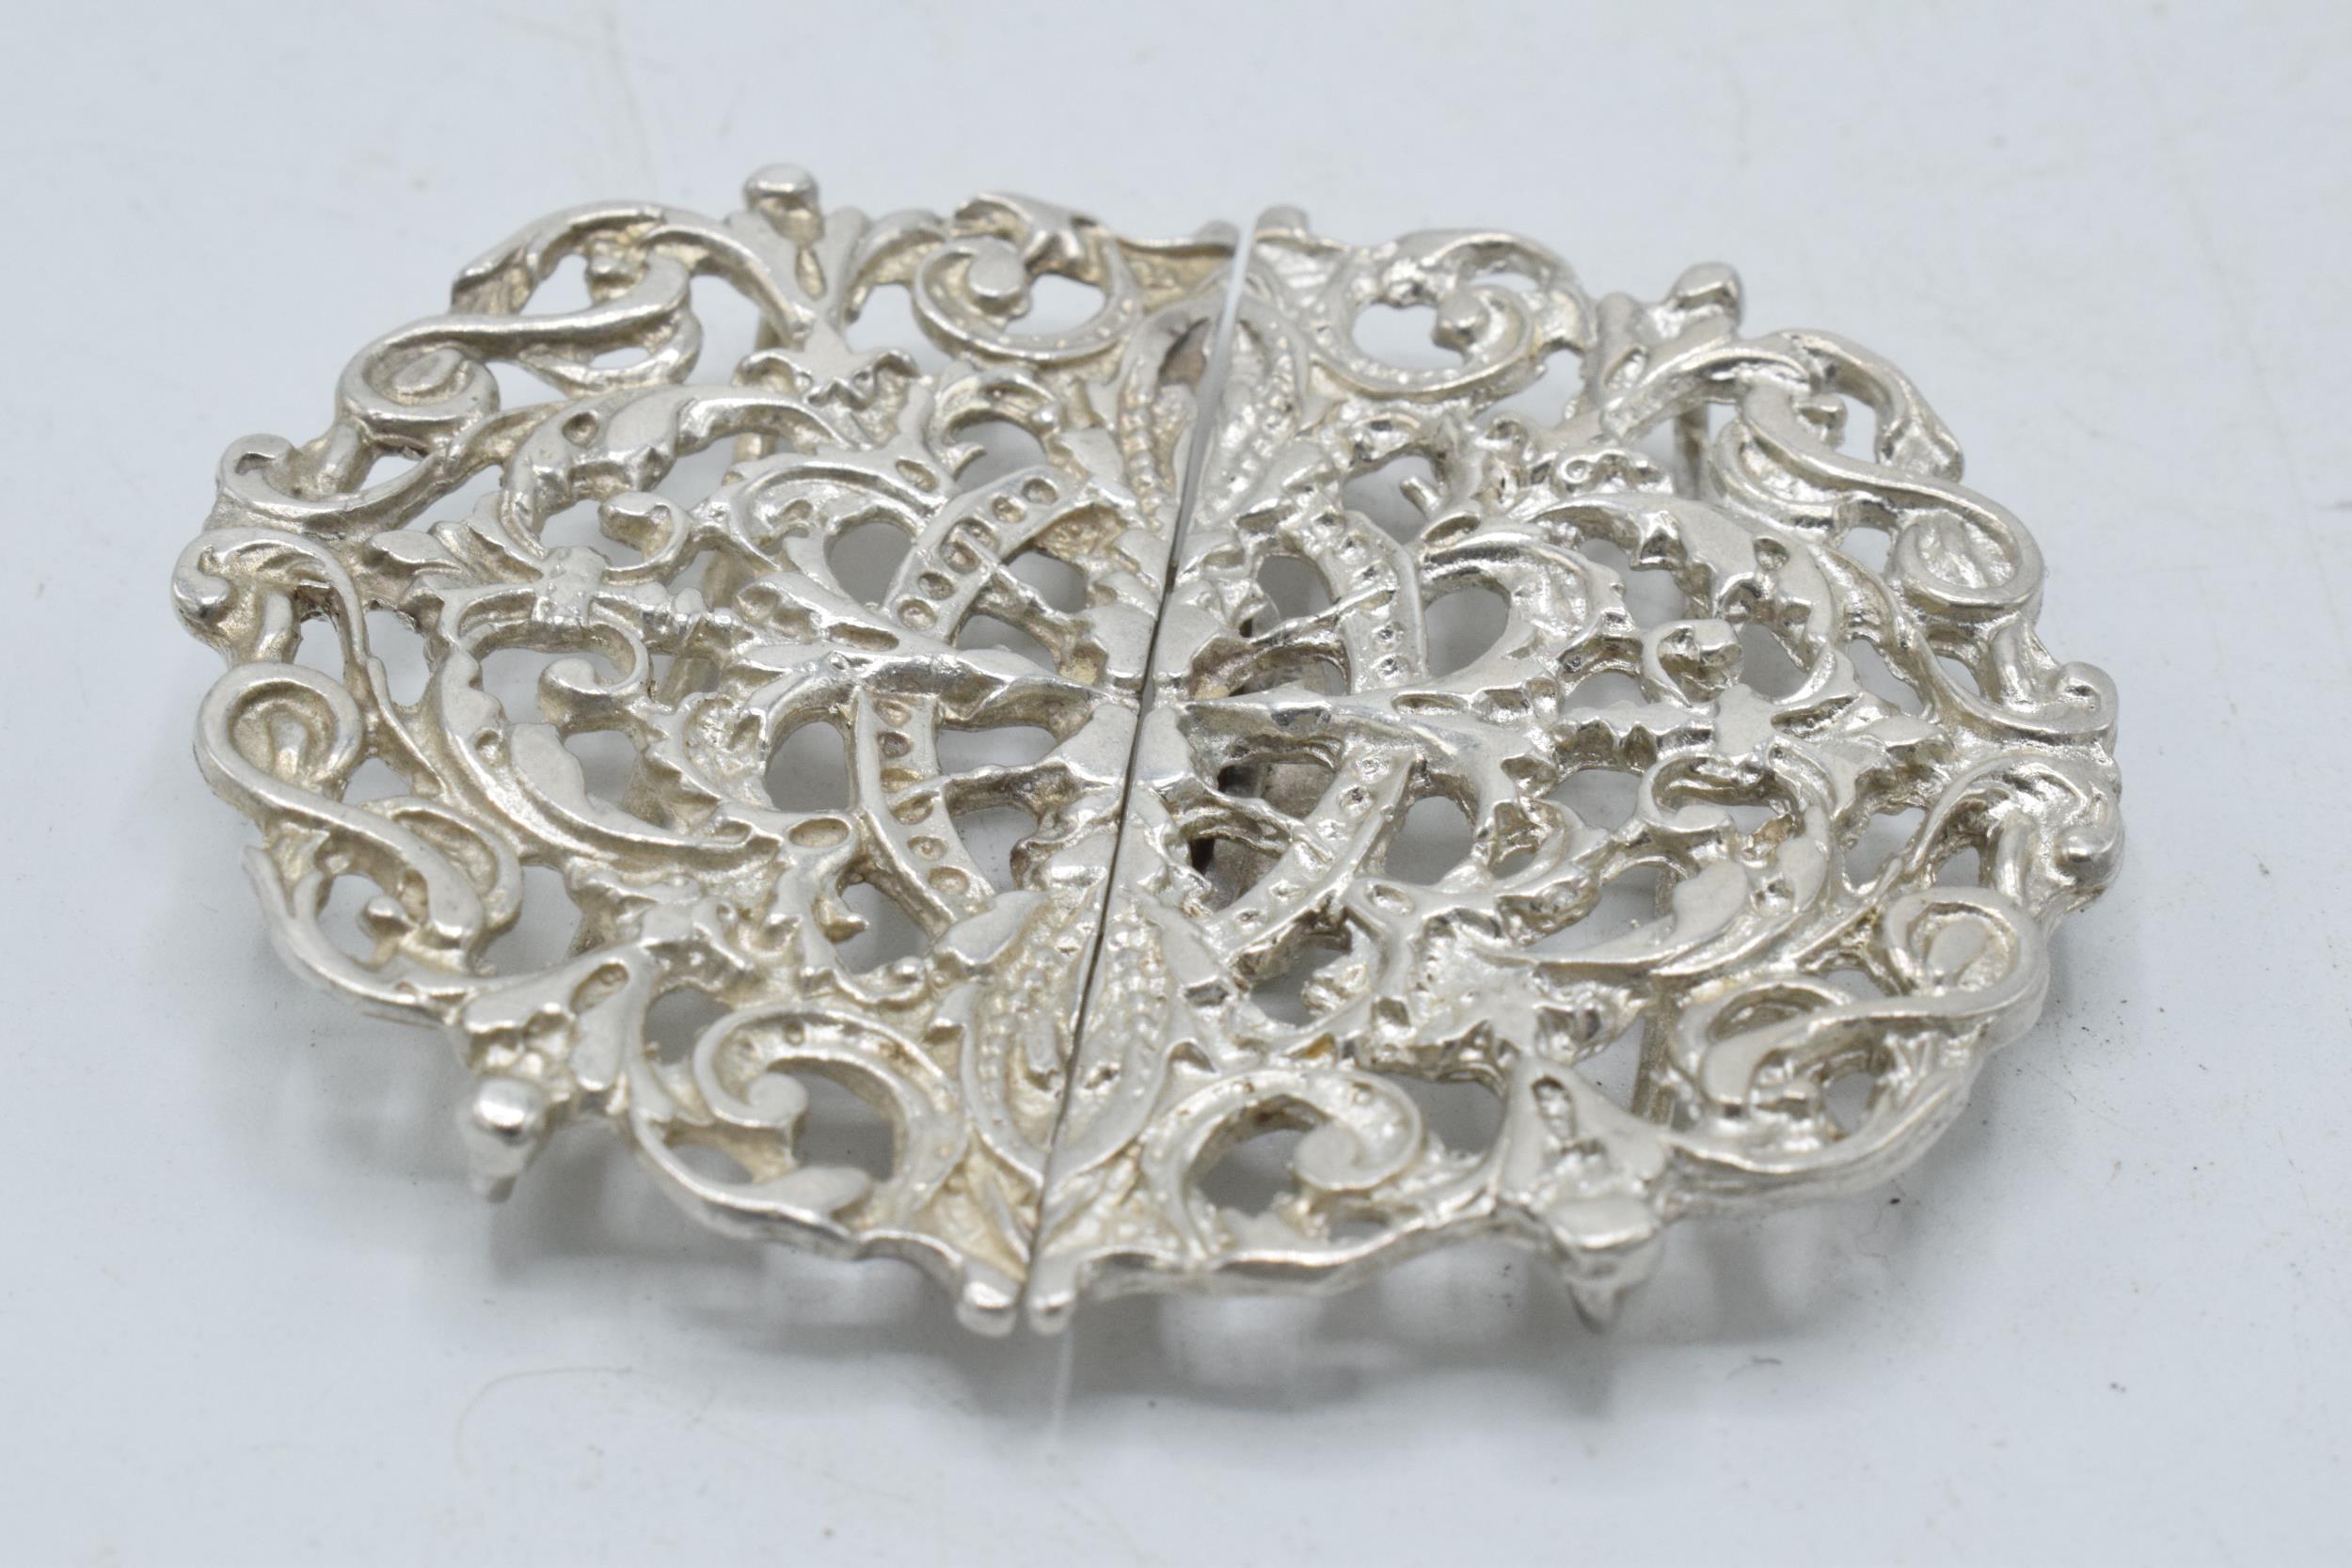 Continental silver ornate belt buckle, 27.2 grams. - Image 3 of 5